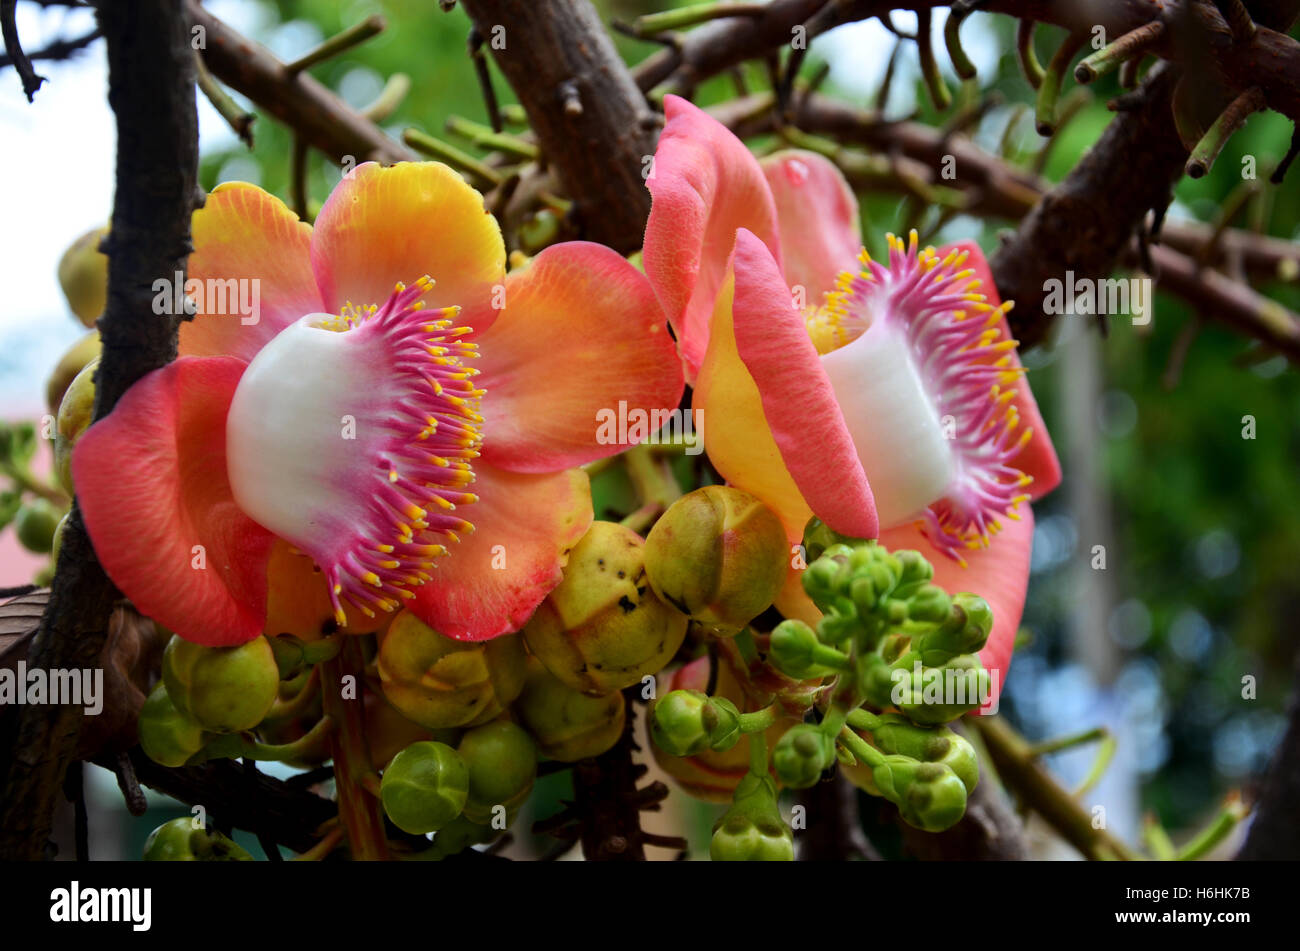 Sala flora or Shorea robusta flower on Cannonball Tree and the sal tree is revered by many Buddhist people around the world. Stock Photo